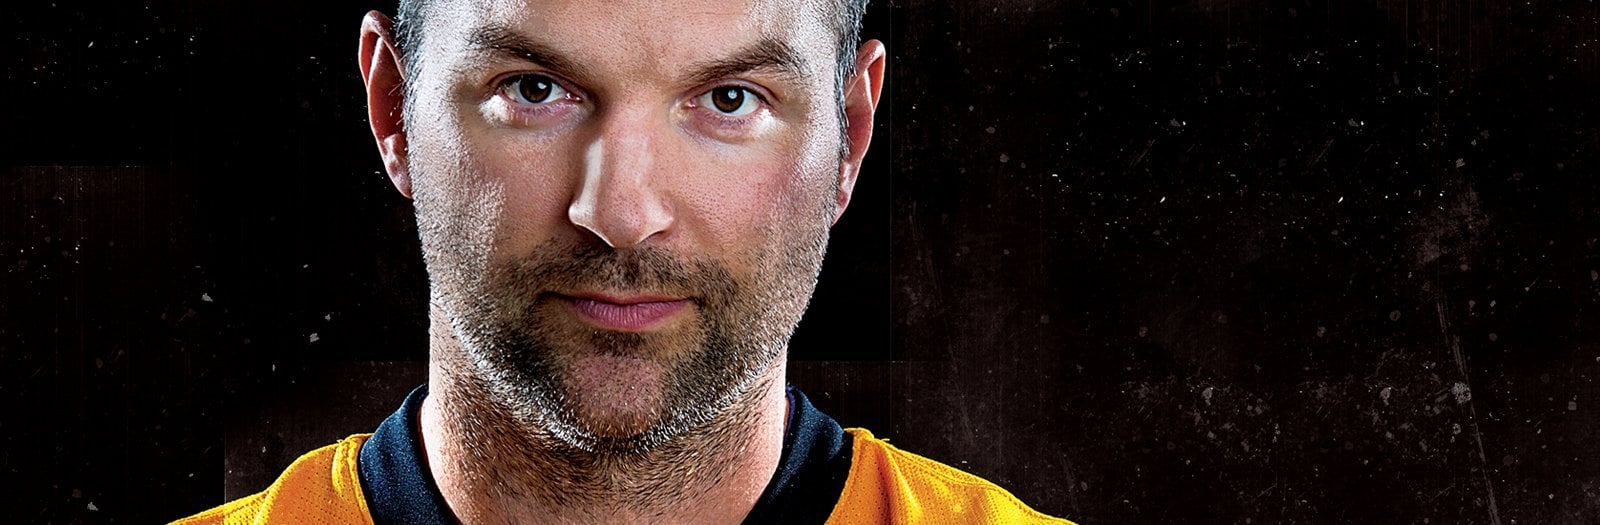 NHL All-Star Game MVP, John Scott inspired a nation with his grit and determination--and his unlikely journey started here.